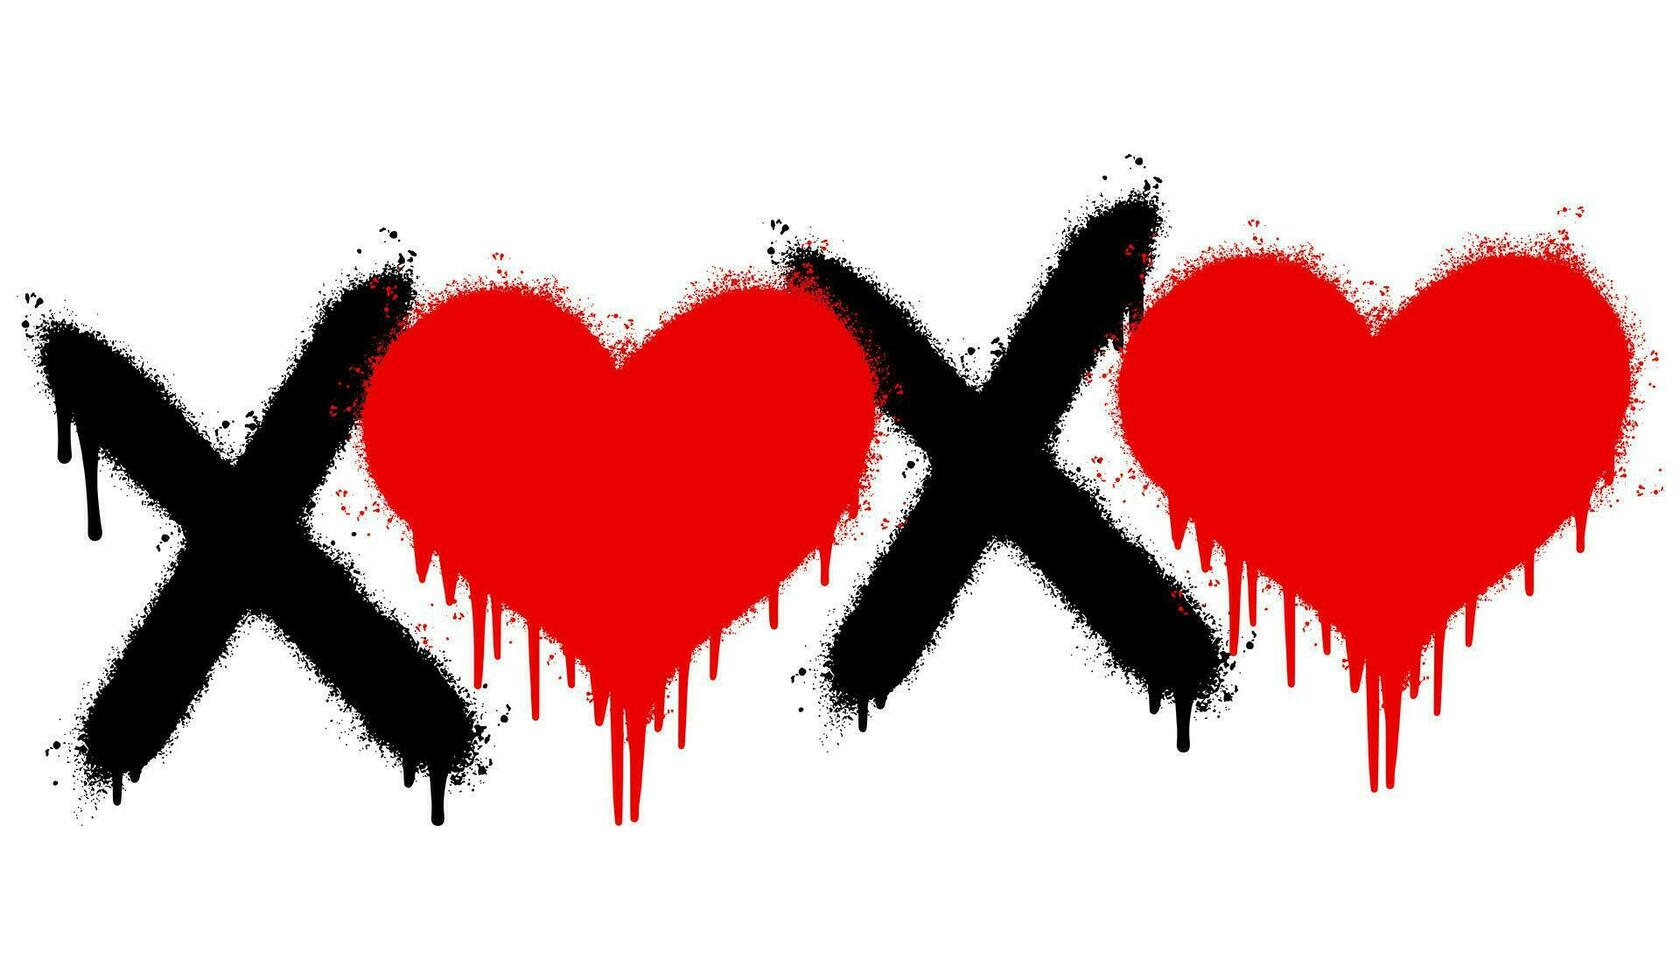 Spray Painted Graffiti xoxo Word Sprayed isolated with a white background. graffiti font xoxo with over spray in black over white. vector